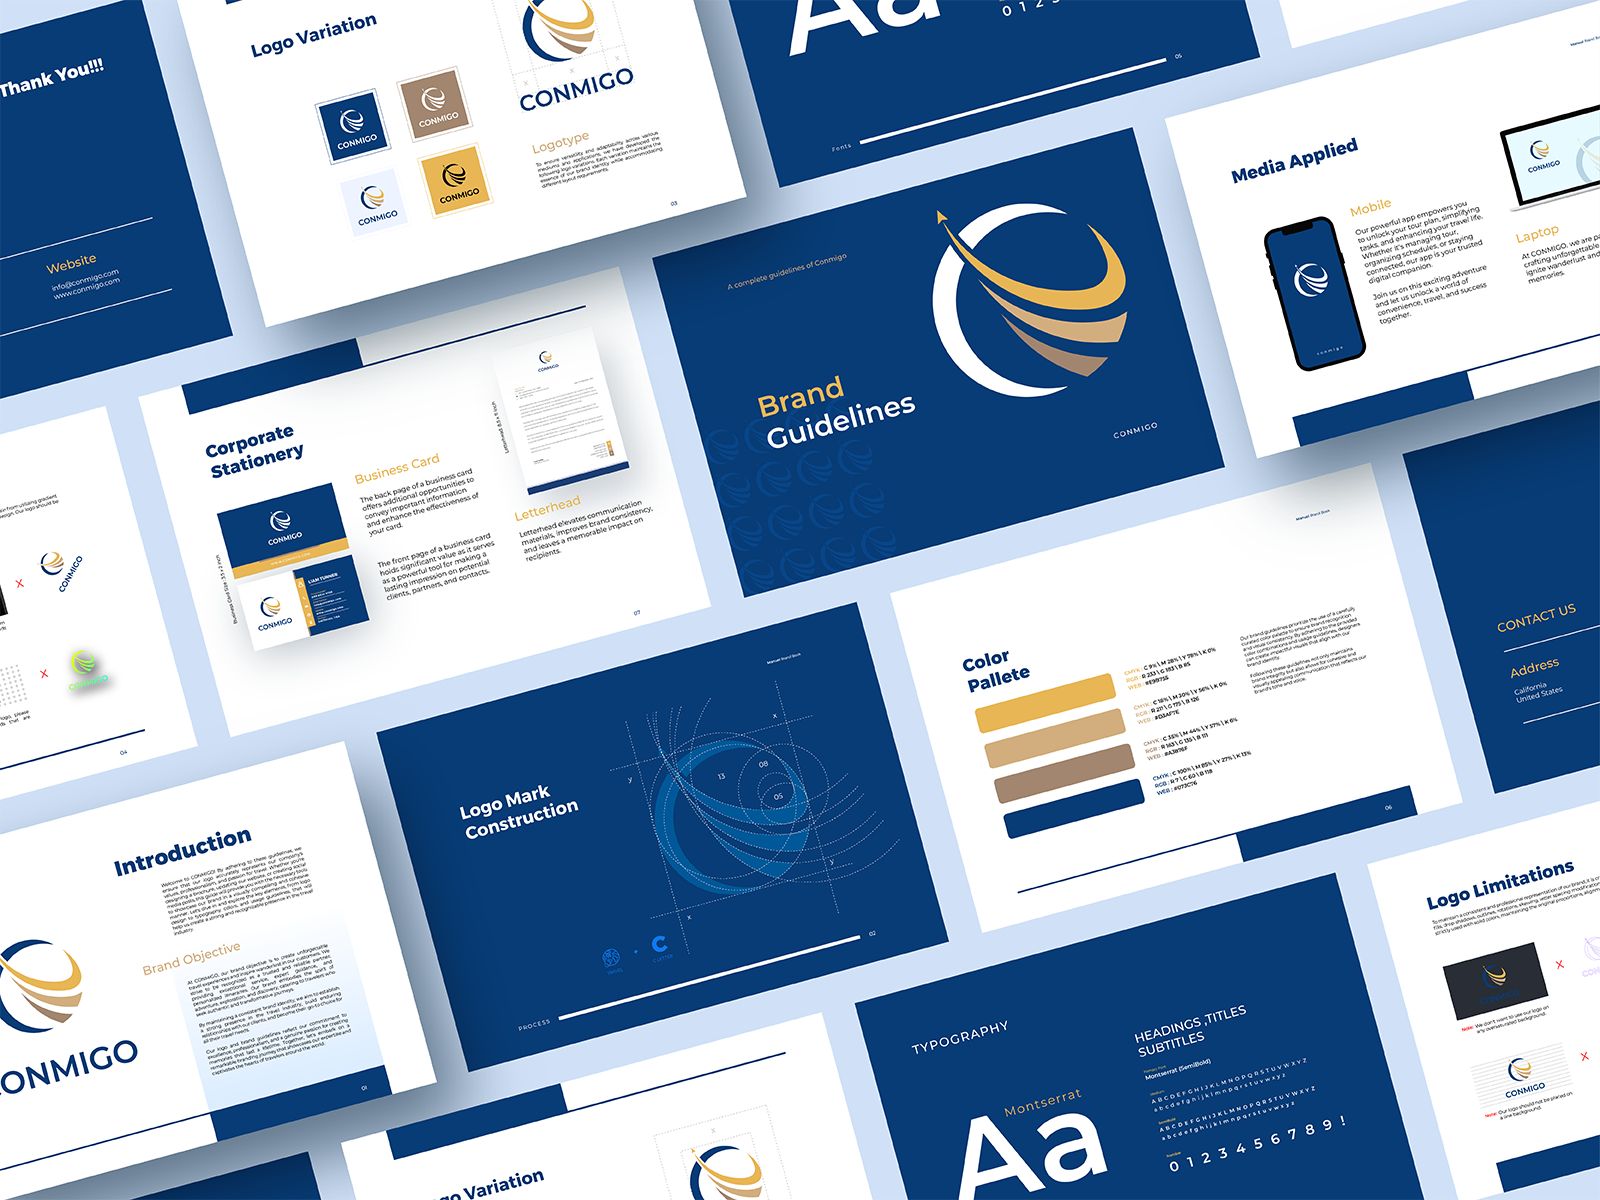 A bunch of blue and yellow visual style guides